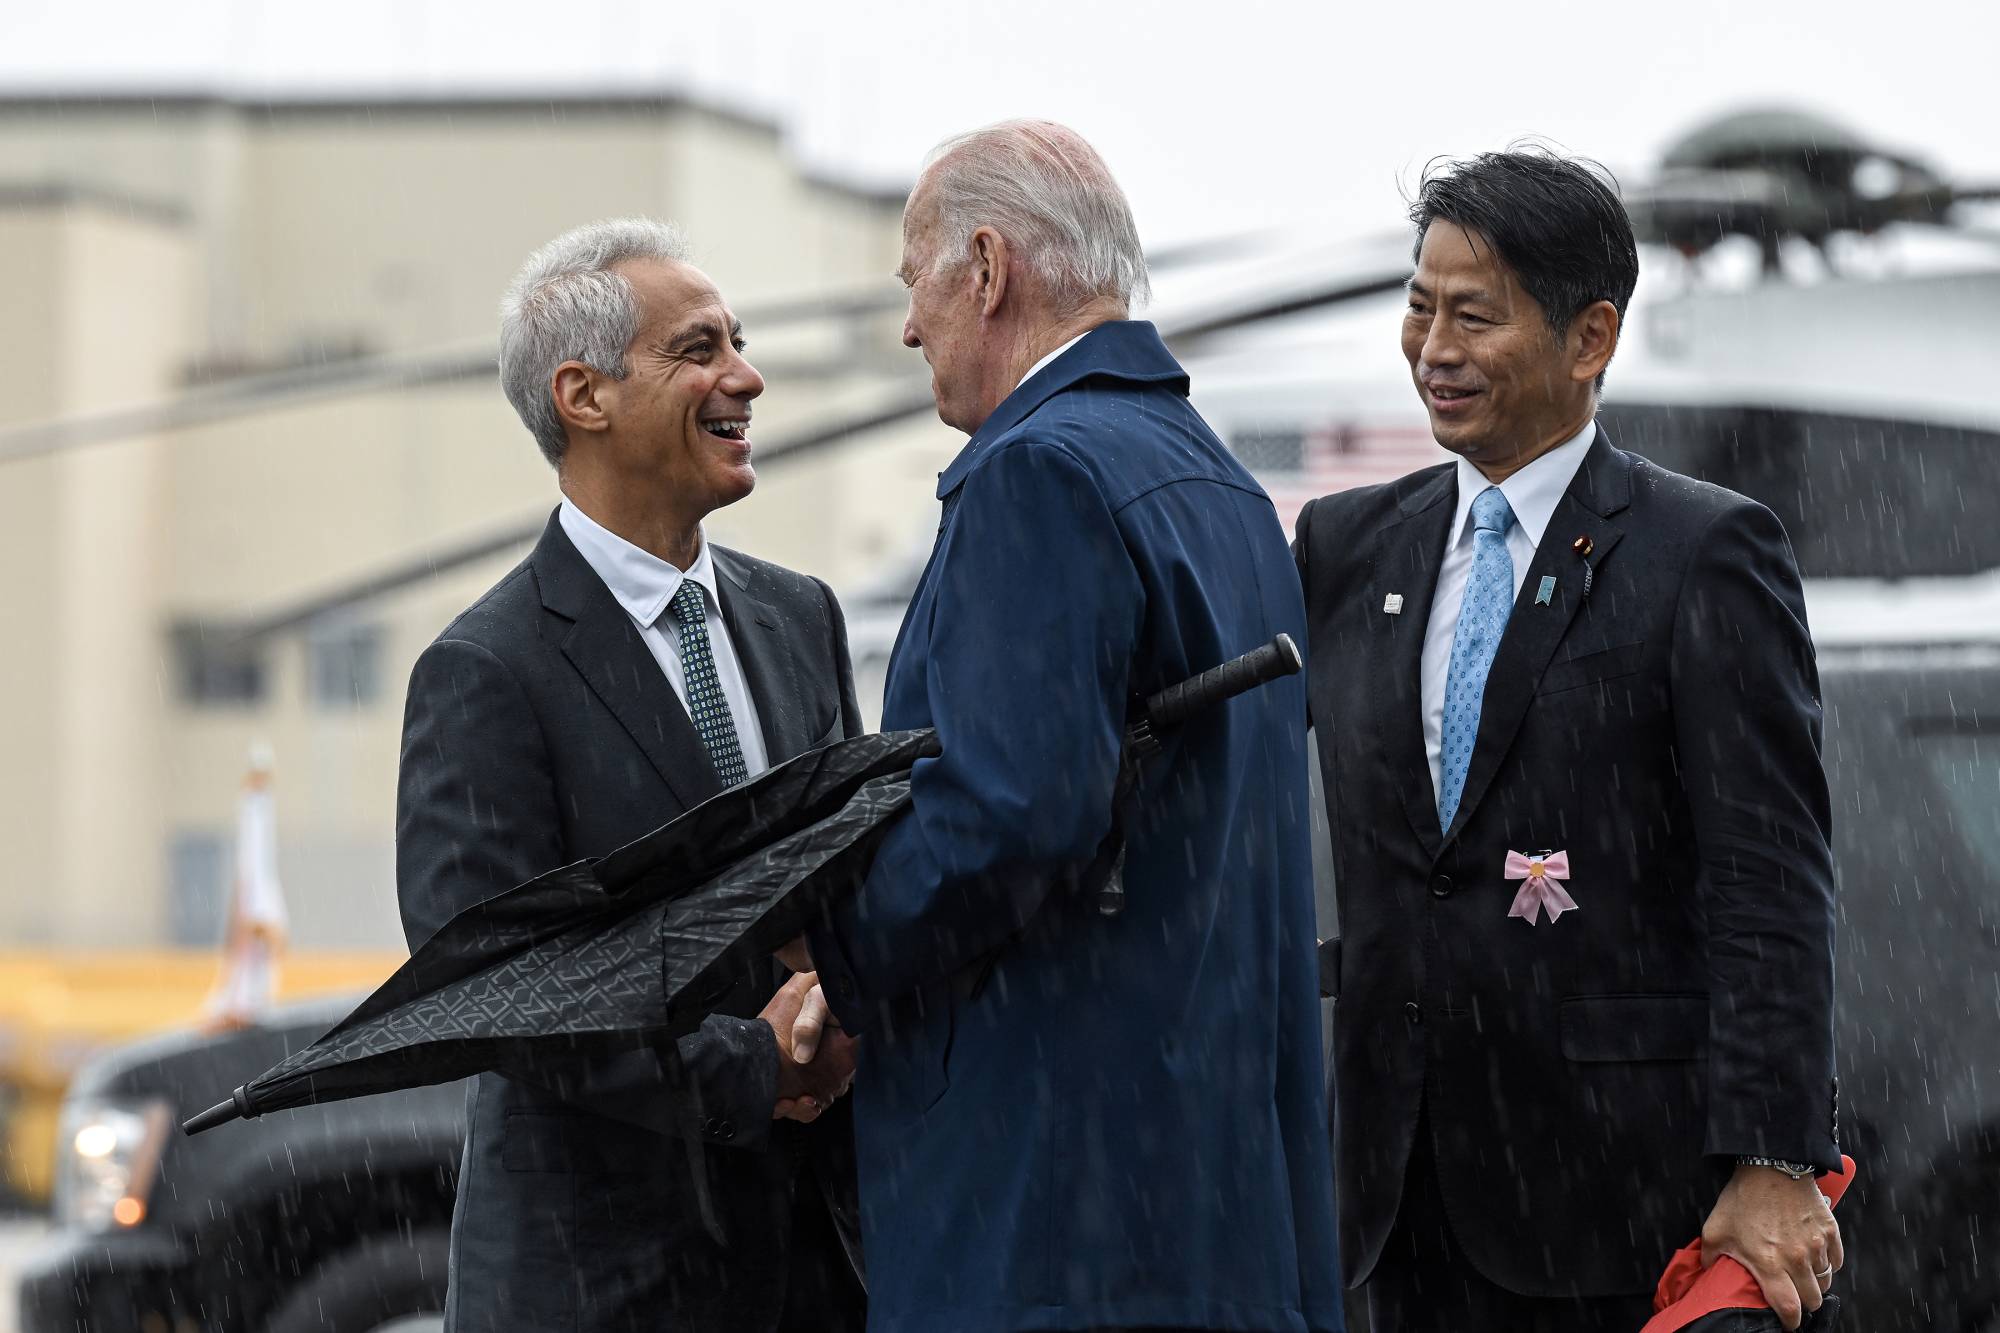 U.S. President Joe Biden (center), is greeted by Rahm Emanuel, the U.S. ambassador to Japan, at Marine Corps Air Station Iwakuni in Japan on May 18. | KENNY HOLSTON / THE NEW YORK TIMES